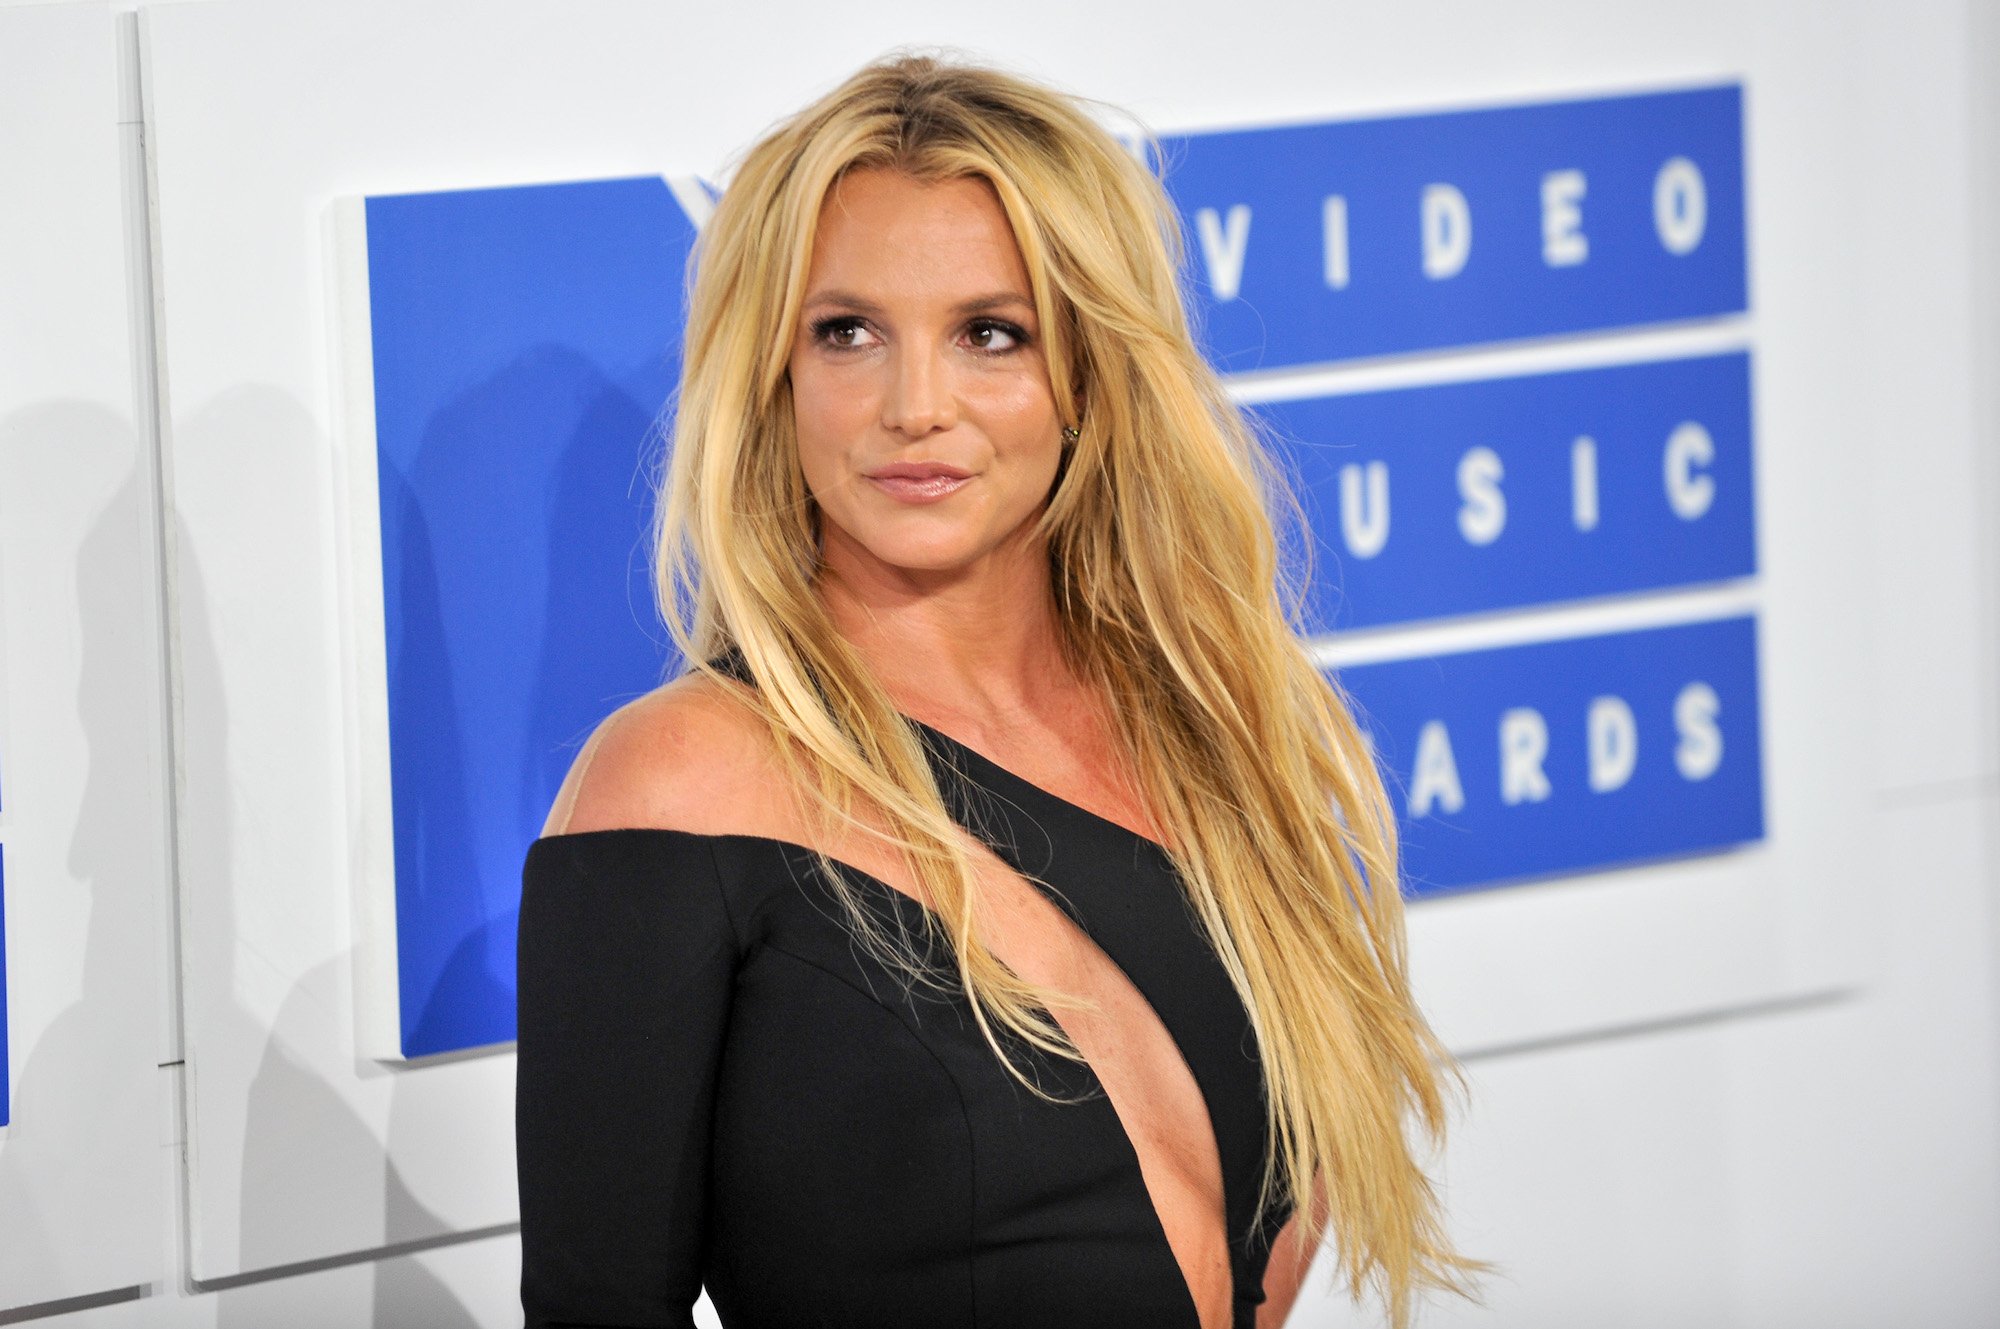 Britney Spears posing on the red carpet at the the 2016 MTV Video Music Awards